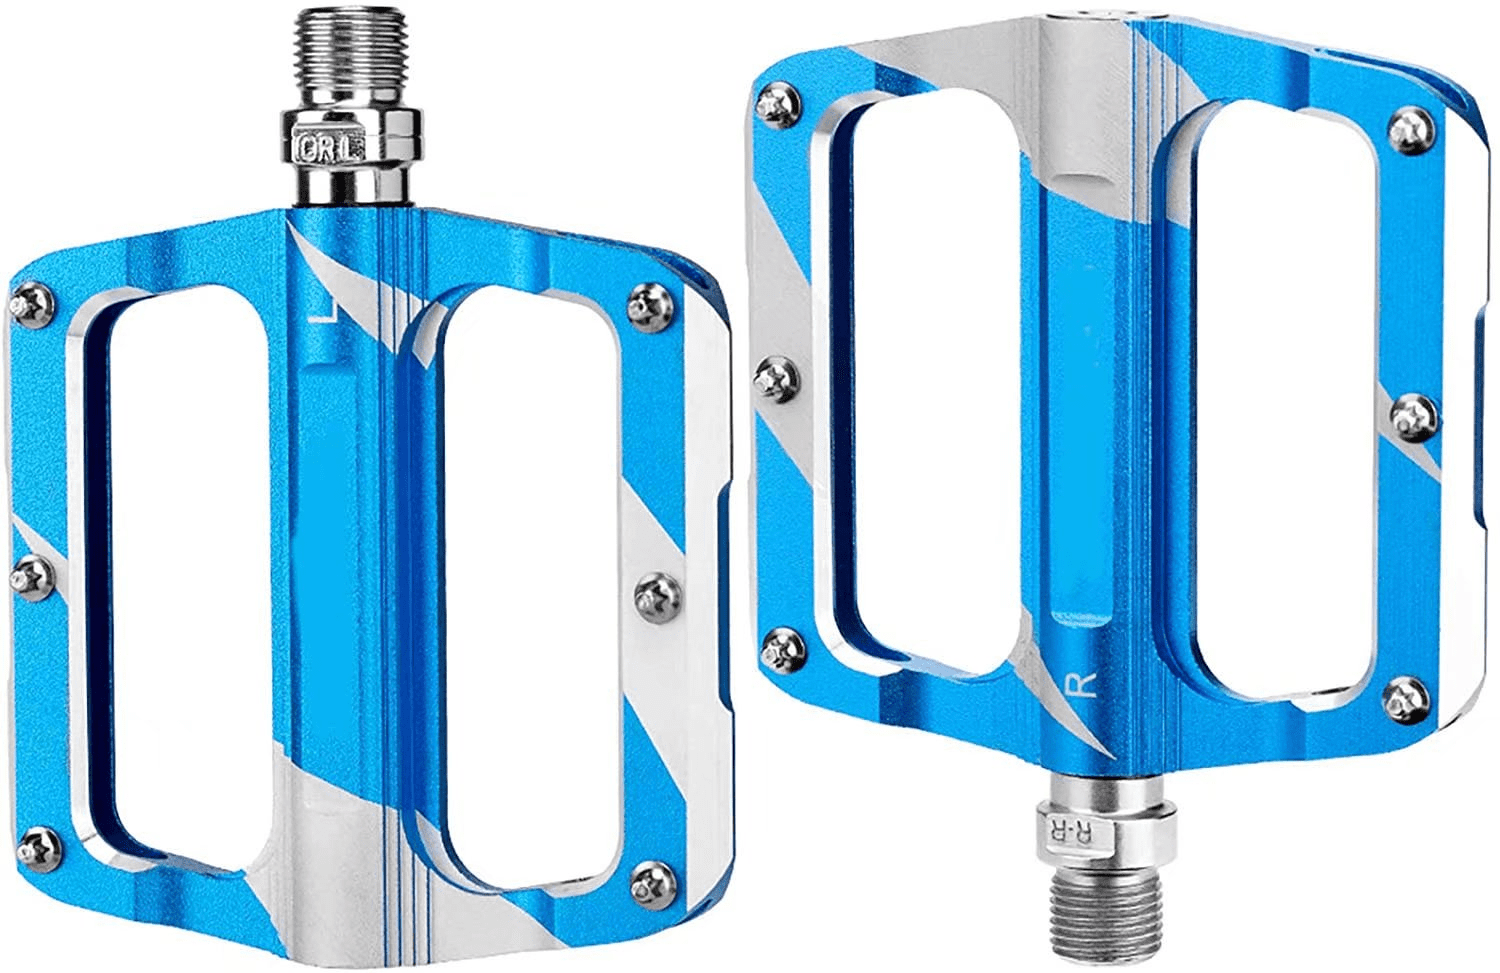 Details about   Blue Road Mountain Bike Pedals Aluminum Sealed Bearing 9/16" For MTB BMX US 